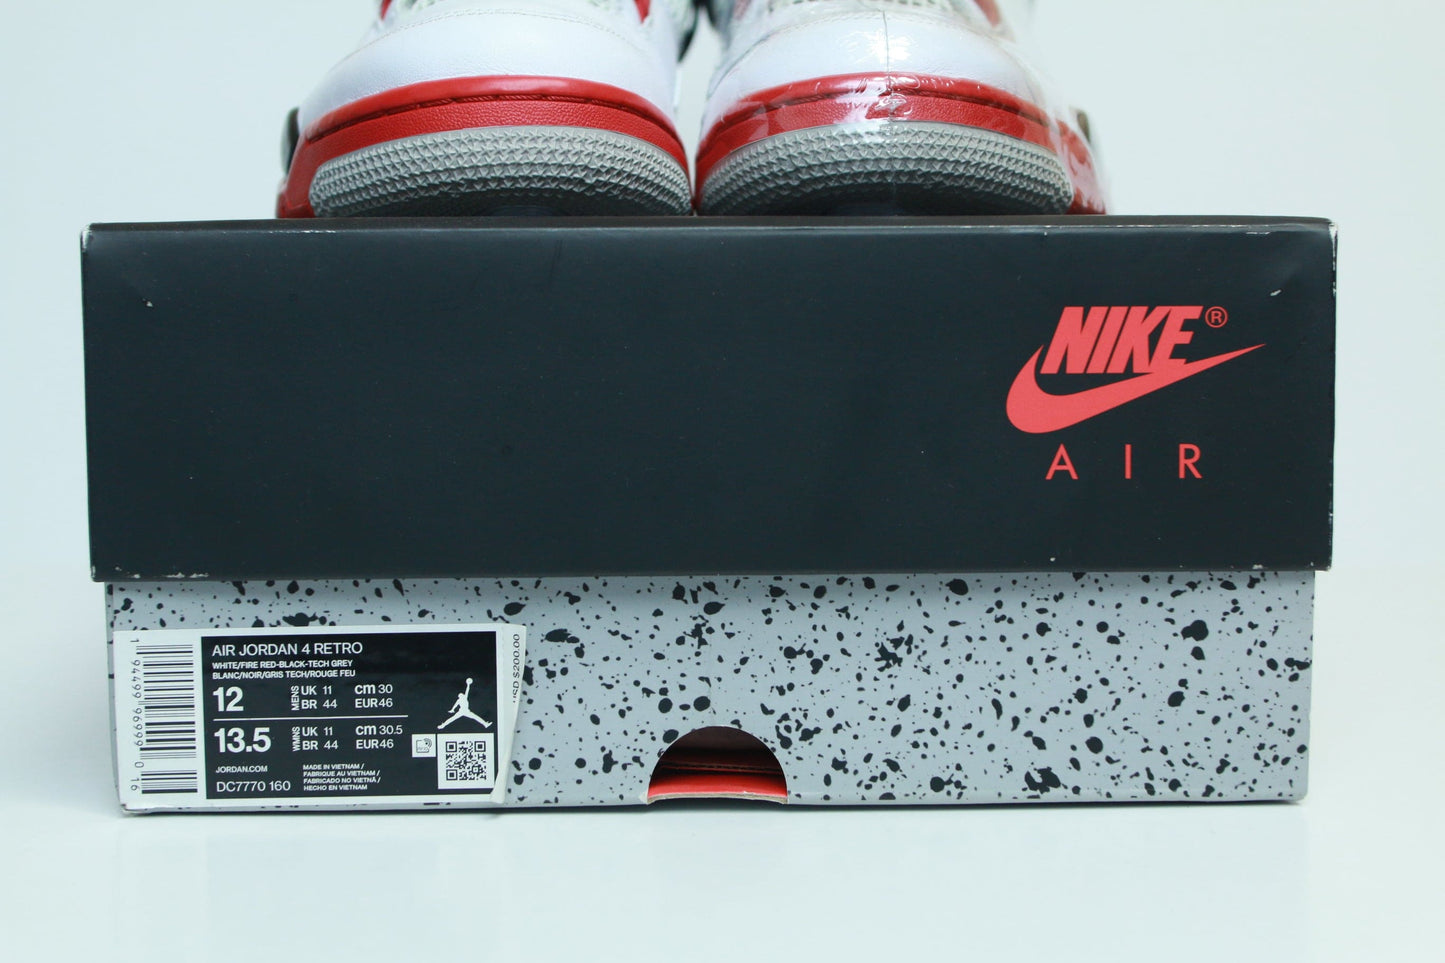 AJ4 FIRE RED DS SIZE 12M